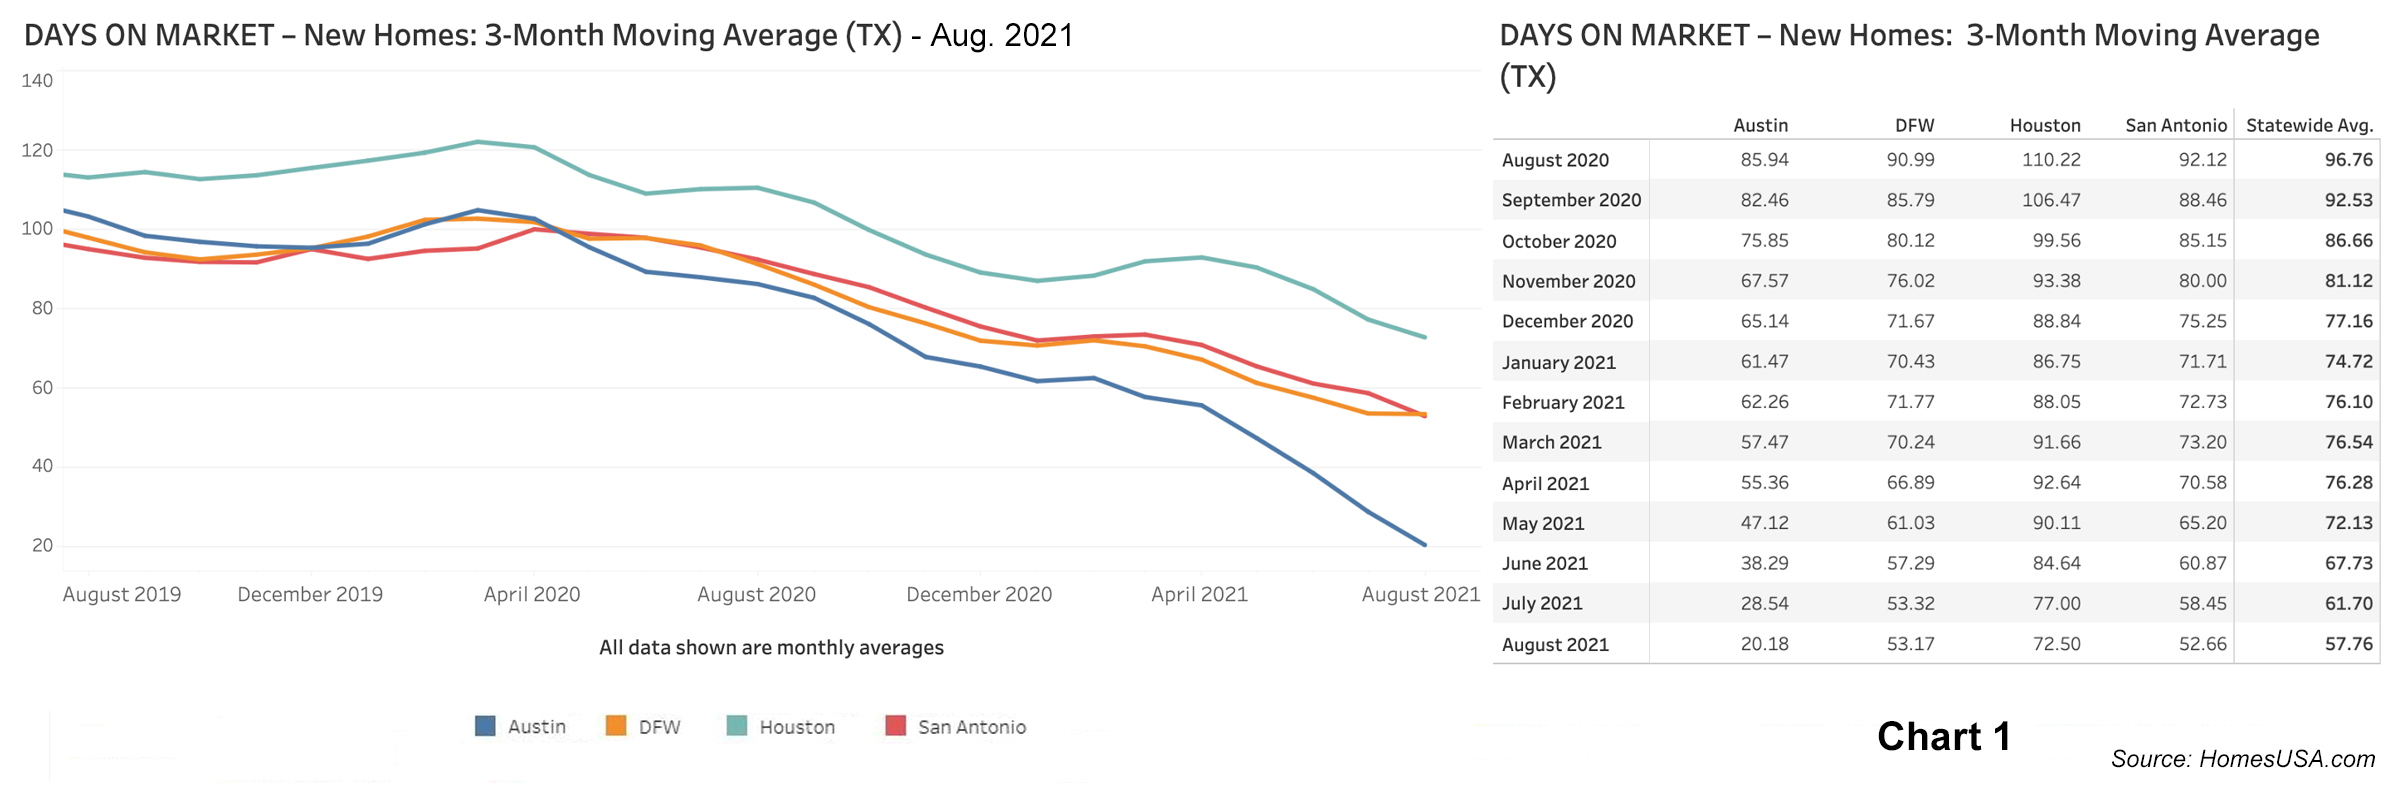 Chart 1: Texas New Homes: Days on Market - August 2021